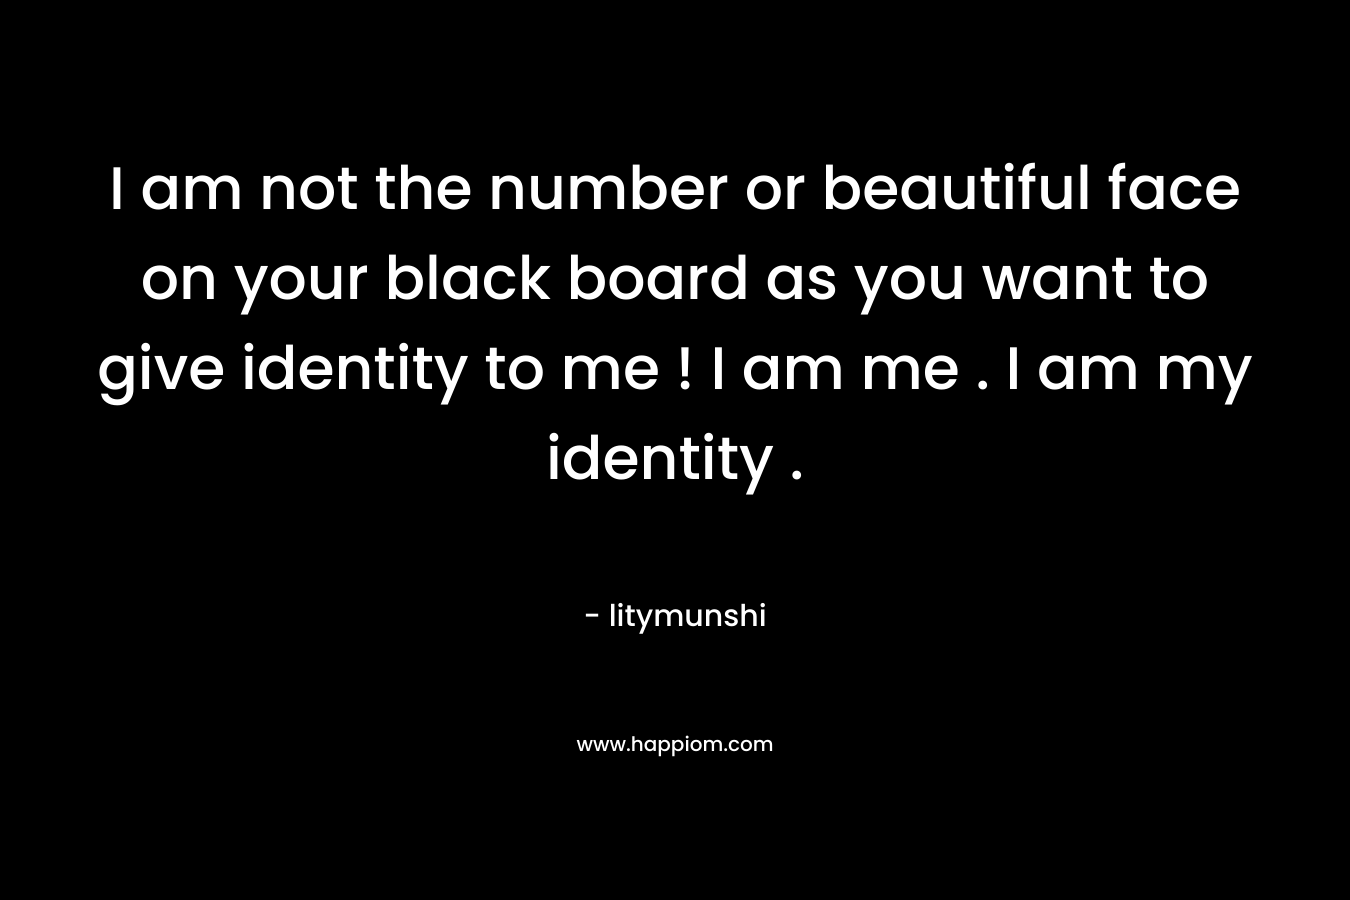 I am not the number or beautiful face on your black board as you want to give identity to me ! I am me . I am my identity .